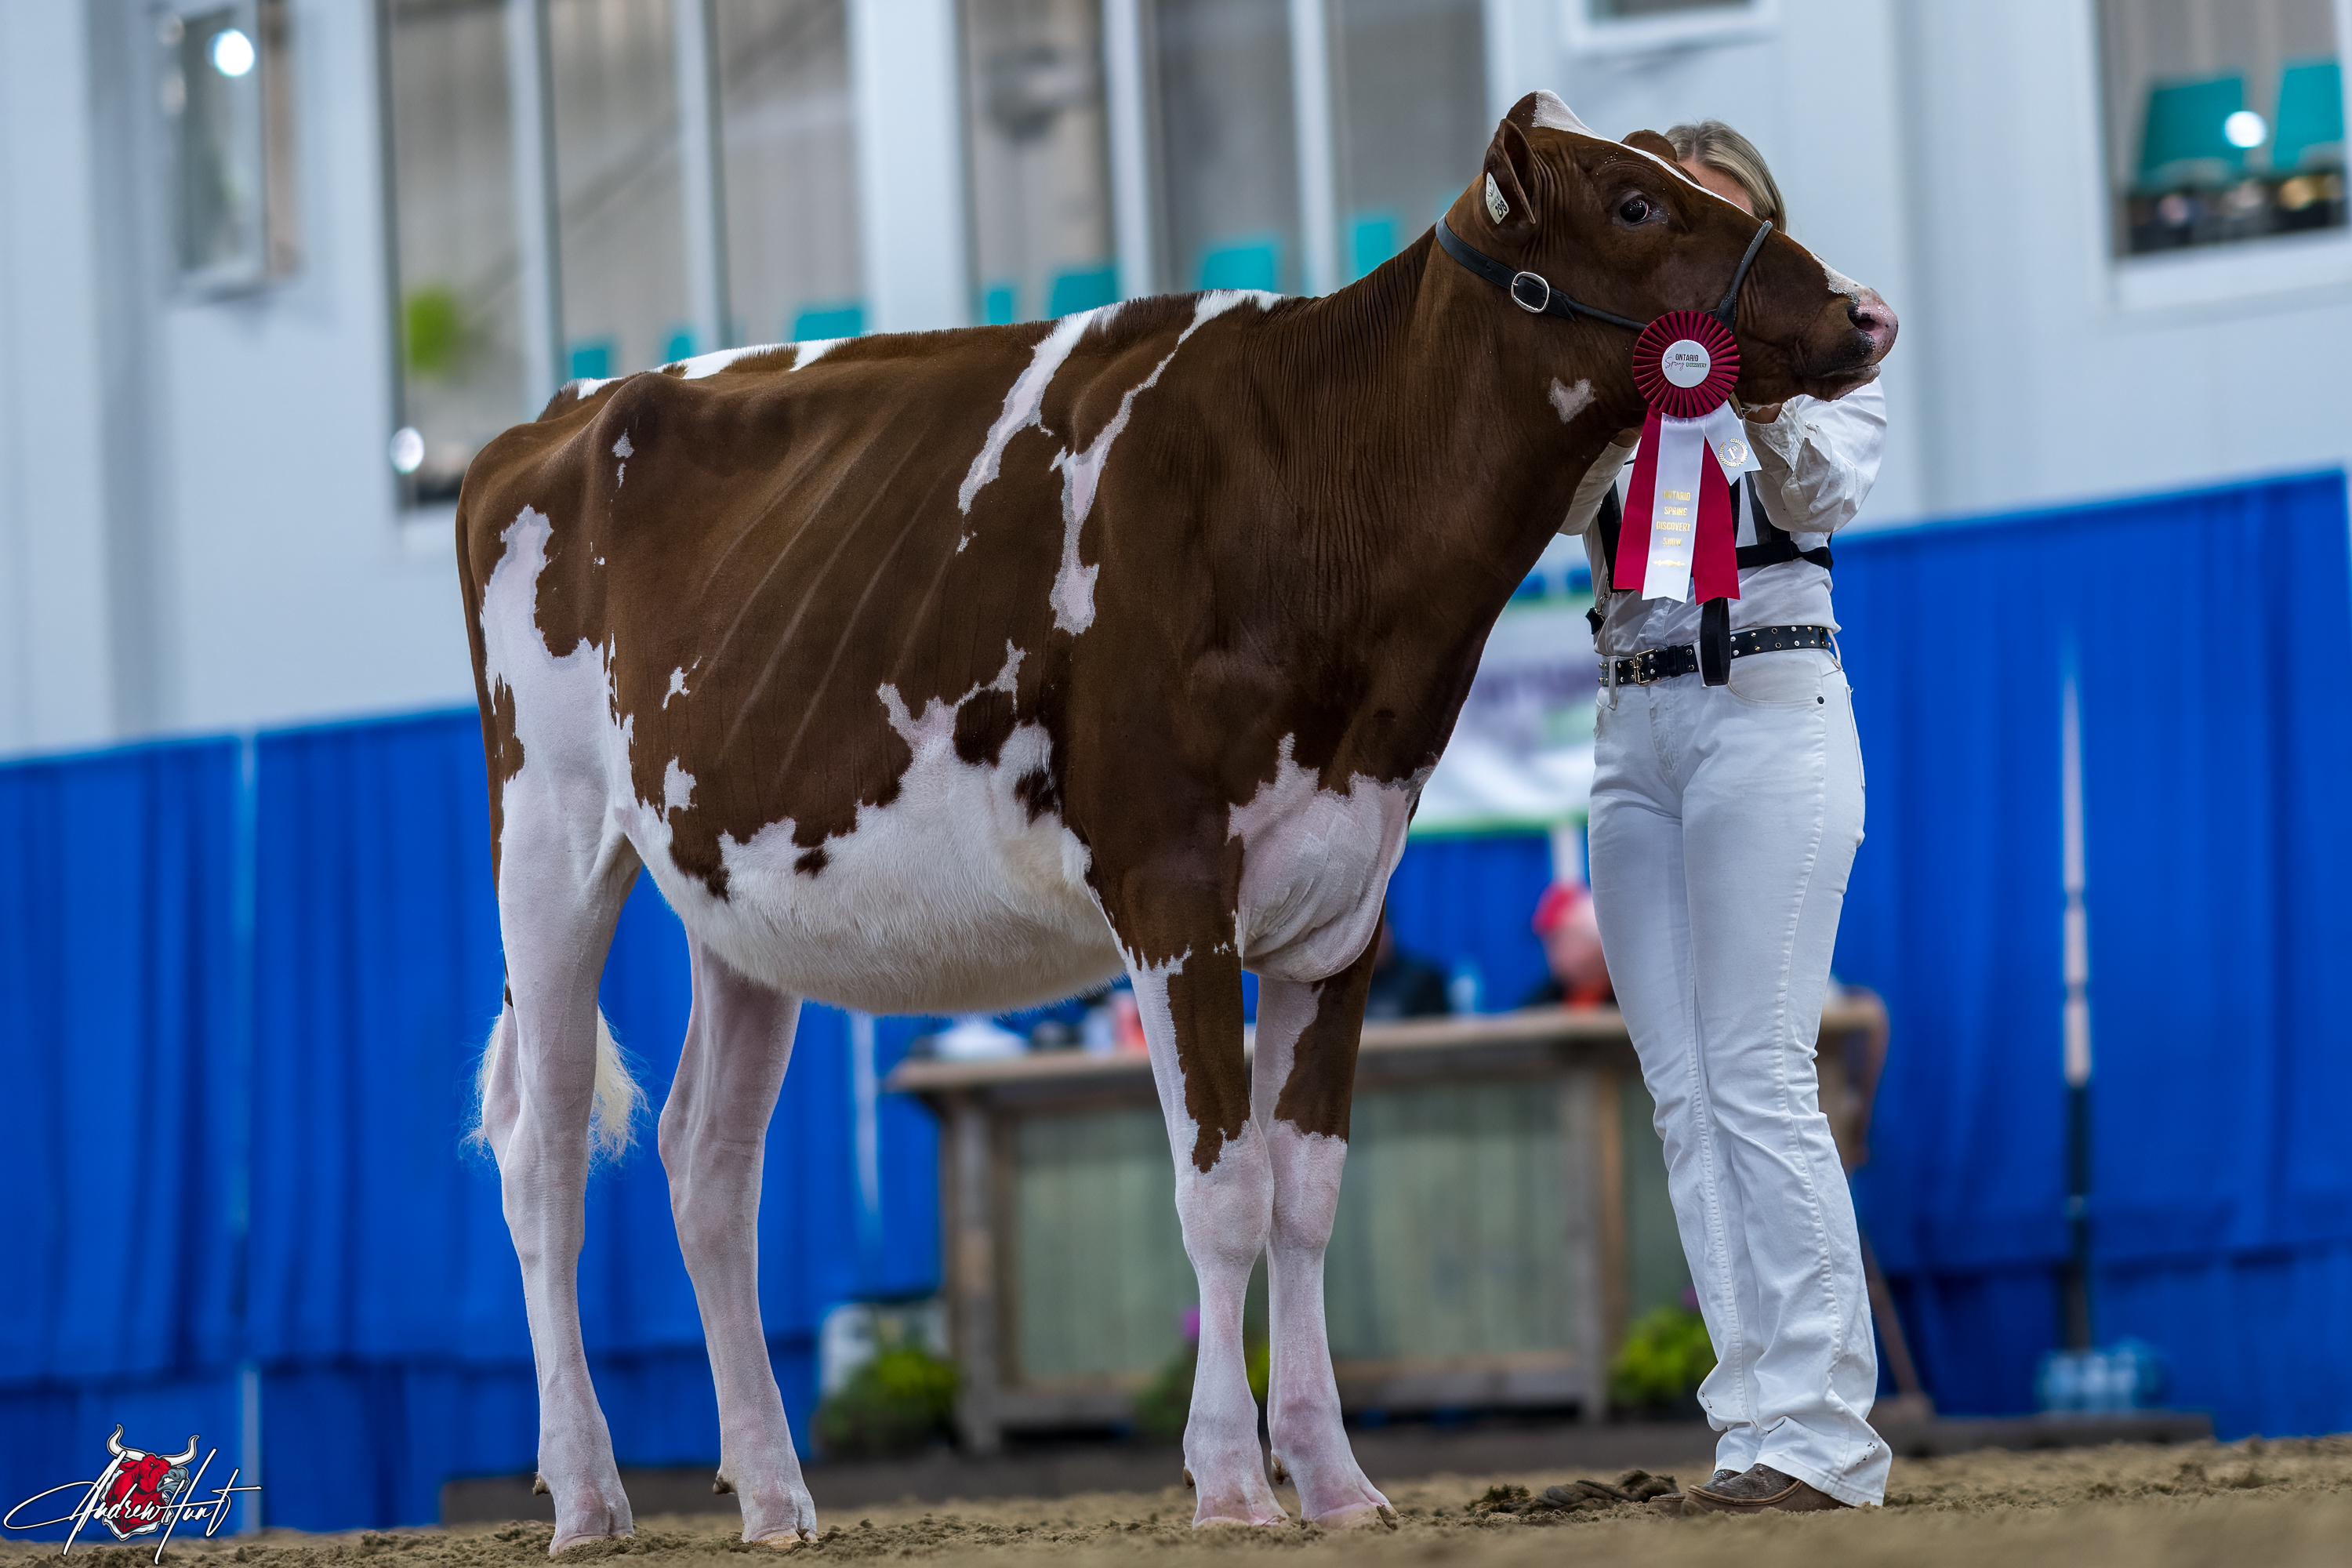 WINRIGHT BELIEVE TALLAHASSEE1st place Spring Yearling Ontario Spring Discovery Dairy Show Holstein 2024 M & G LINTVELT , R. SHORE , VERTHEIN & GRIFITH, WINCHESTER, ON